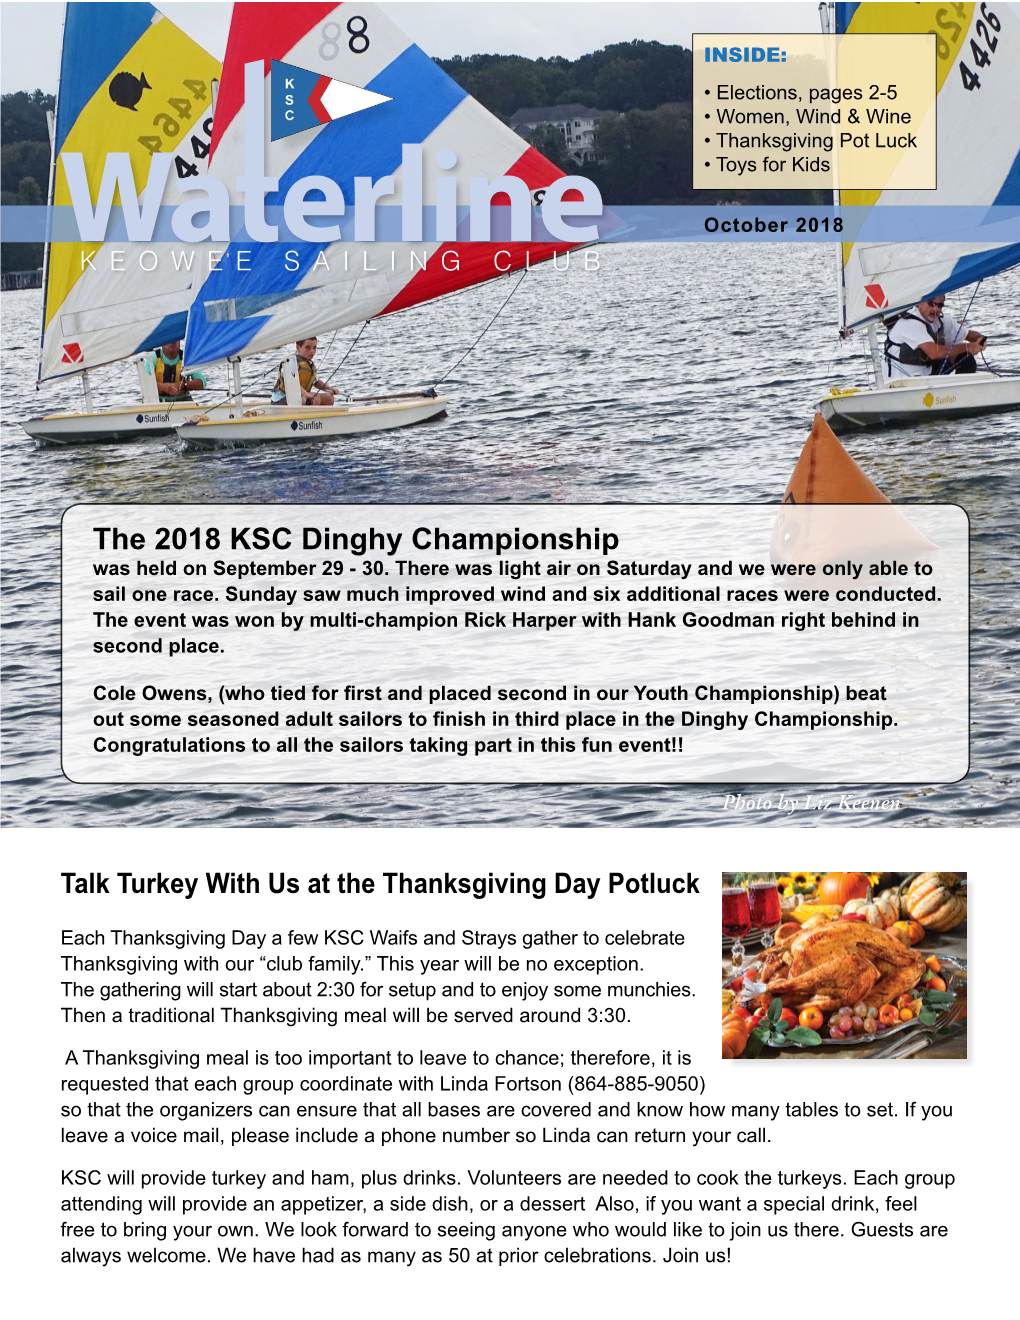 The 2018 KSC Dinghy Championship Was Held on September 29 - 30